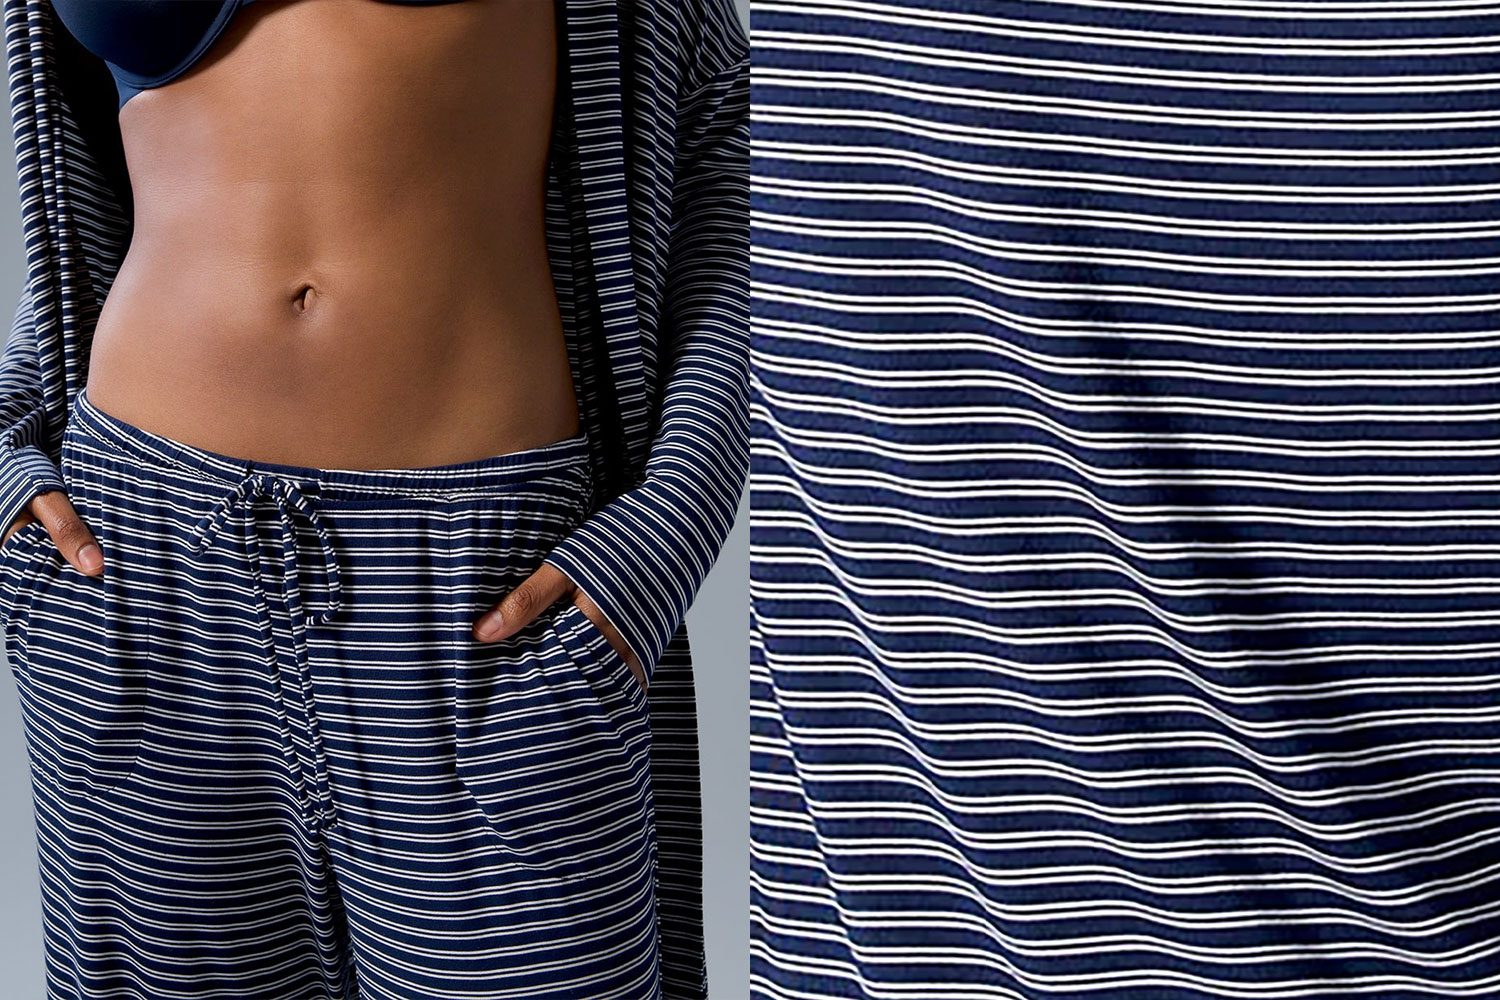 Soma women's model wearing striped rayon pajama pants next to a close-up image of the rayon clothing fabric type.